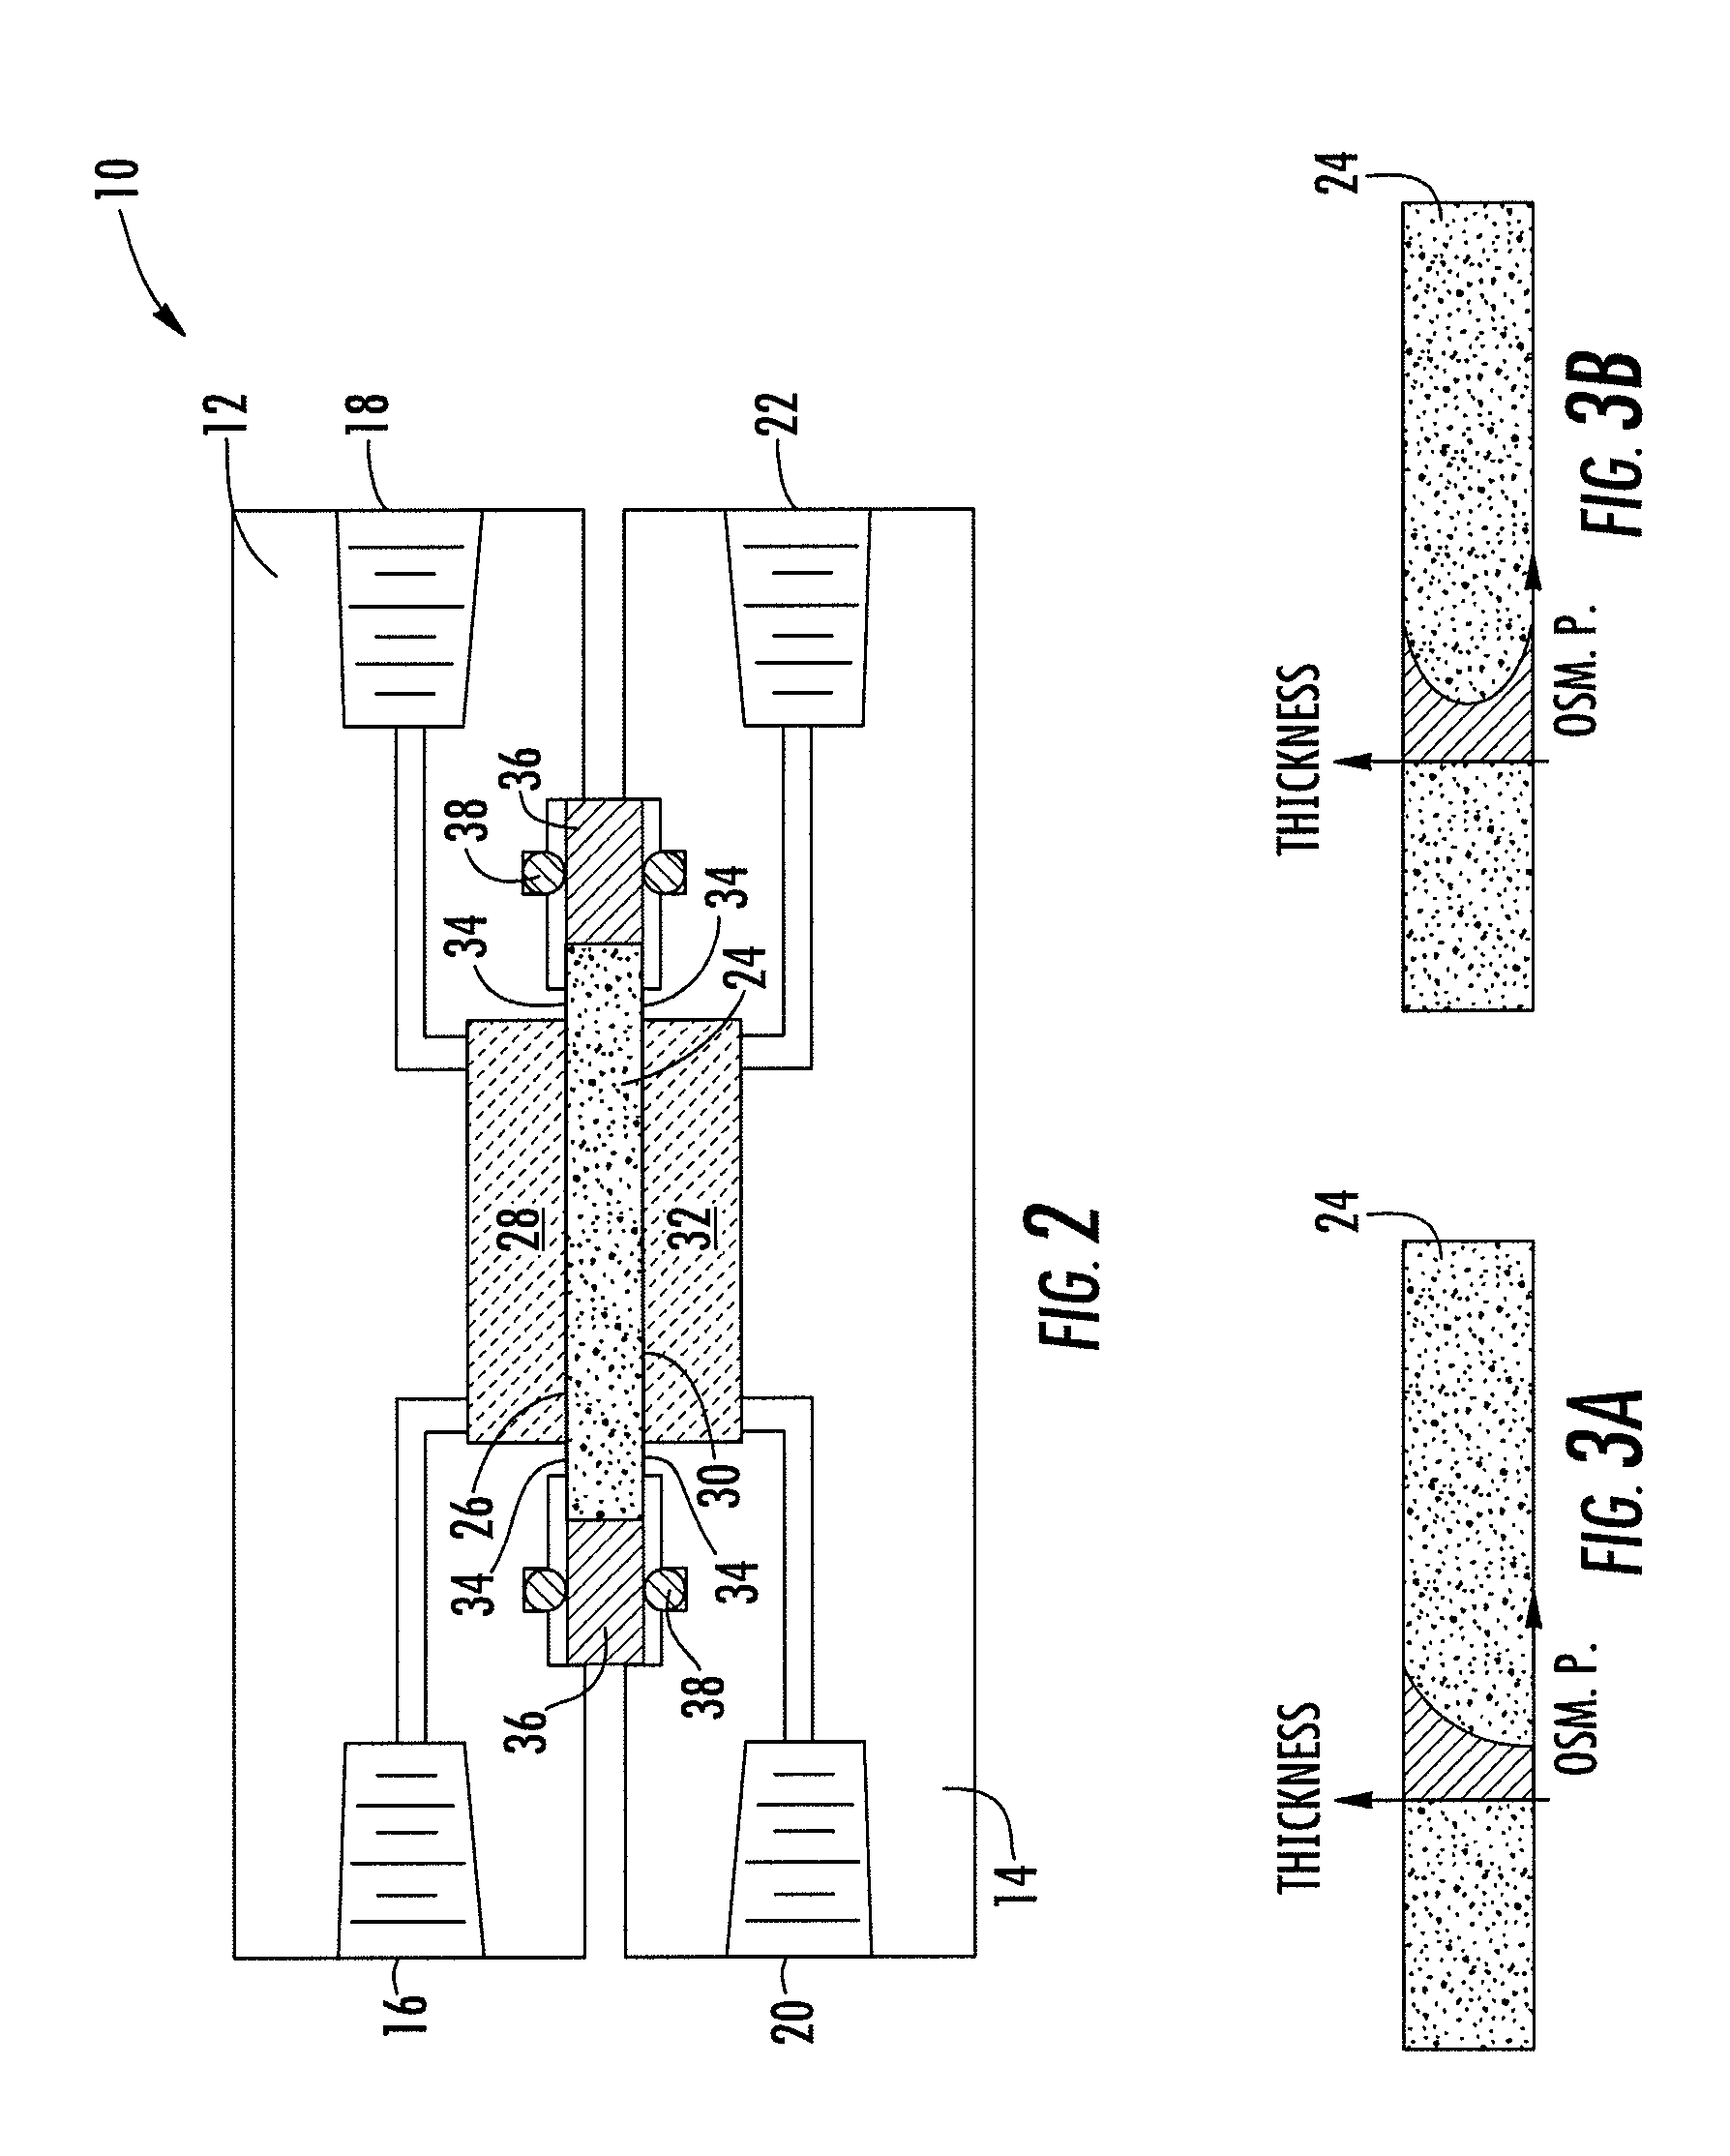 Bioreactor for cell growth and associated methods